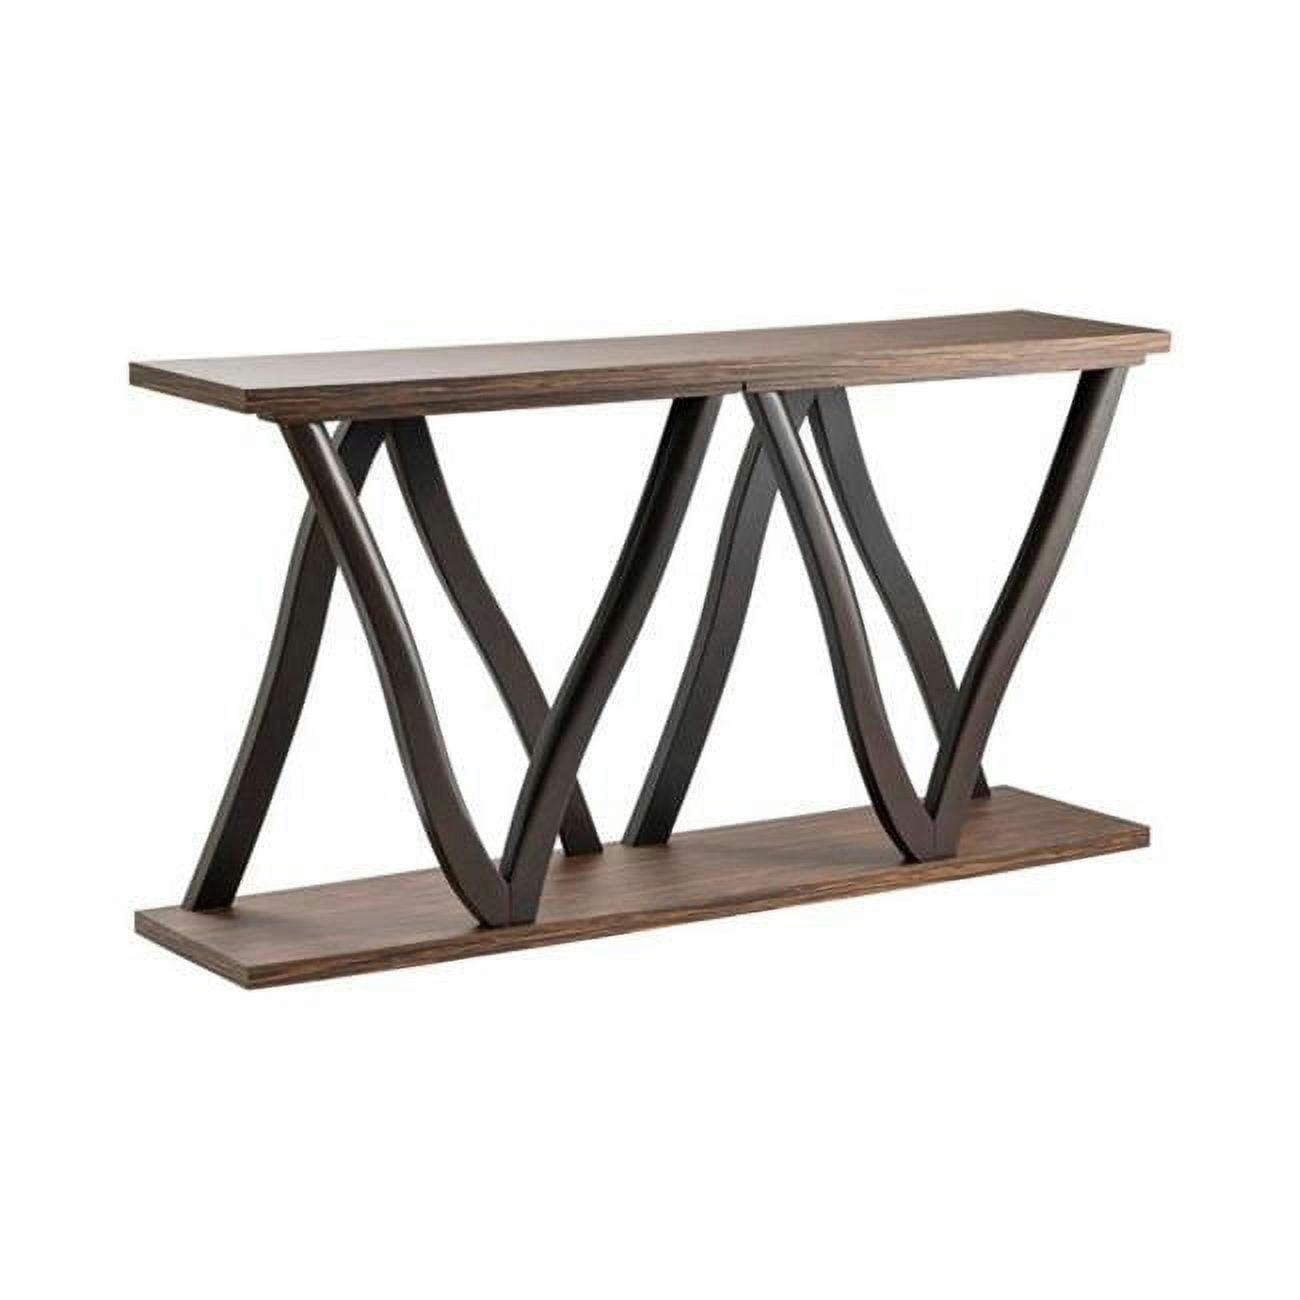 Hawthorne Estate Zebrawood Console Table with Diagonal Supports